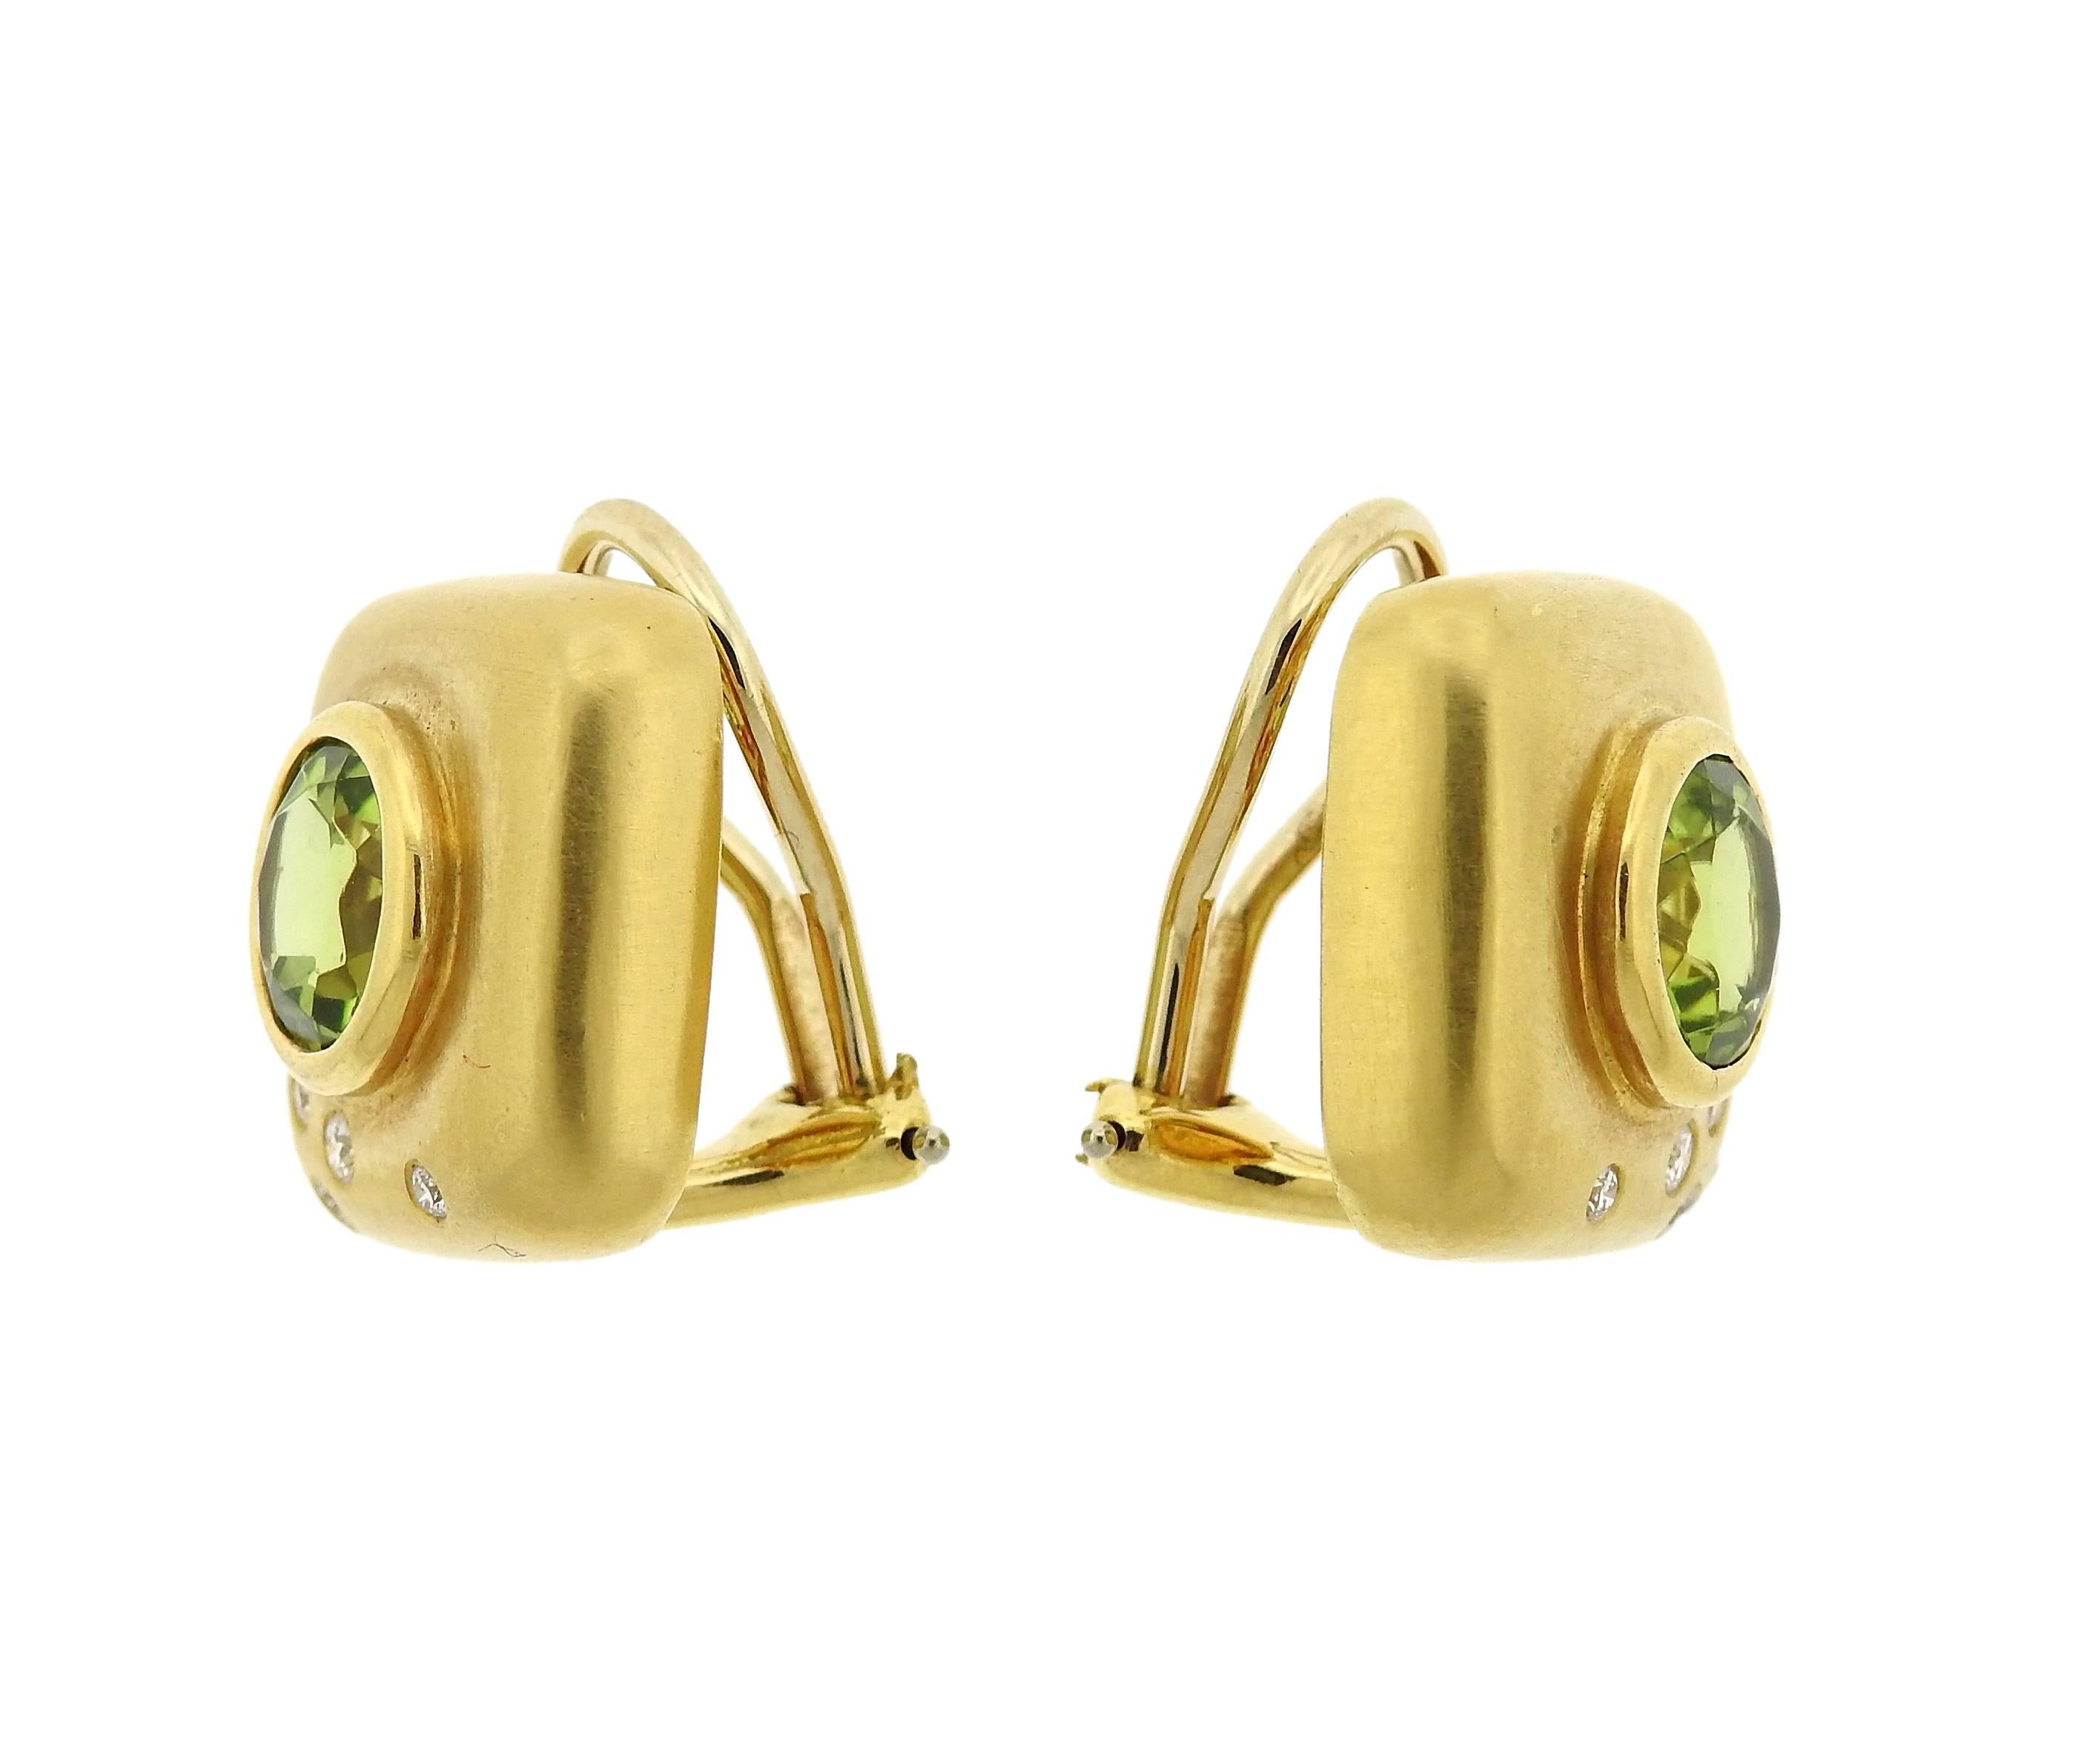 Pair of 18k yellow gold earrings, crafted by Angela Cummings in 1997, decorated with approx. 3.50ctw peridots and 0.20ctw G/VS diamonds . Earrings measure 15mm x 15mm. Marked: 1997, Cummings, 18k. Weight - 16.4 grams 